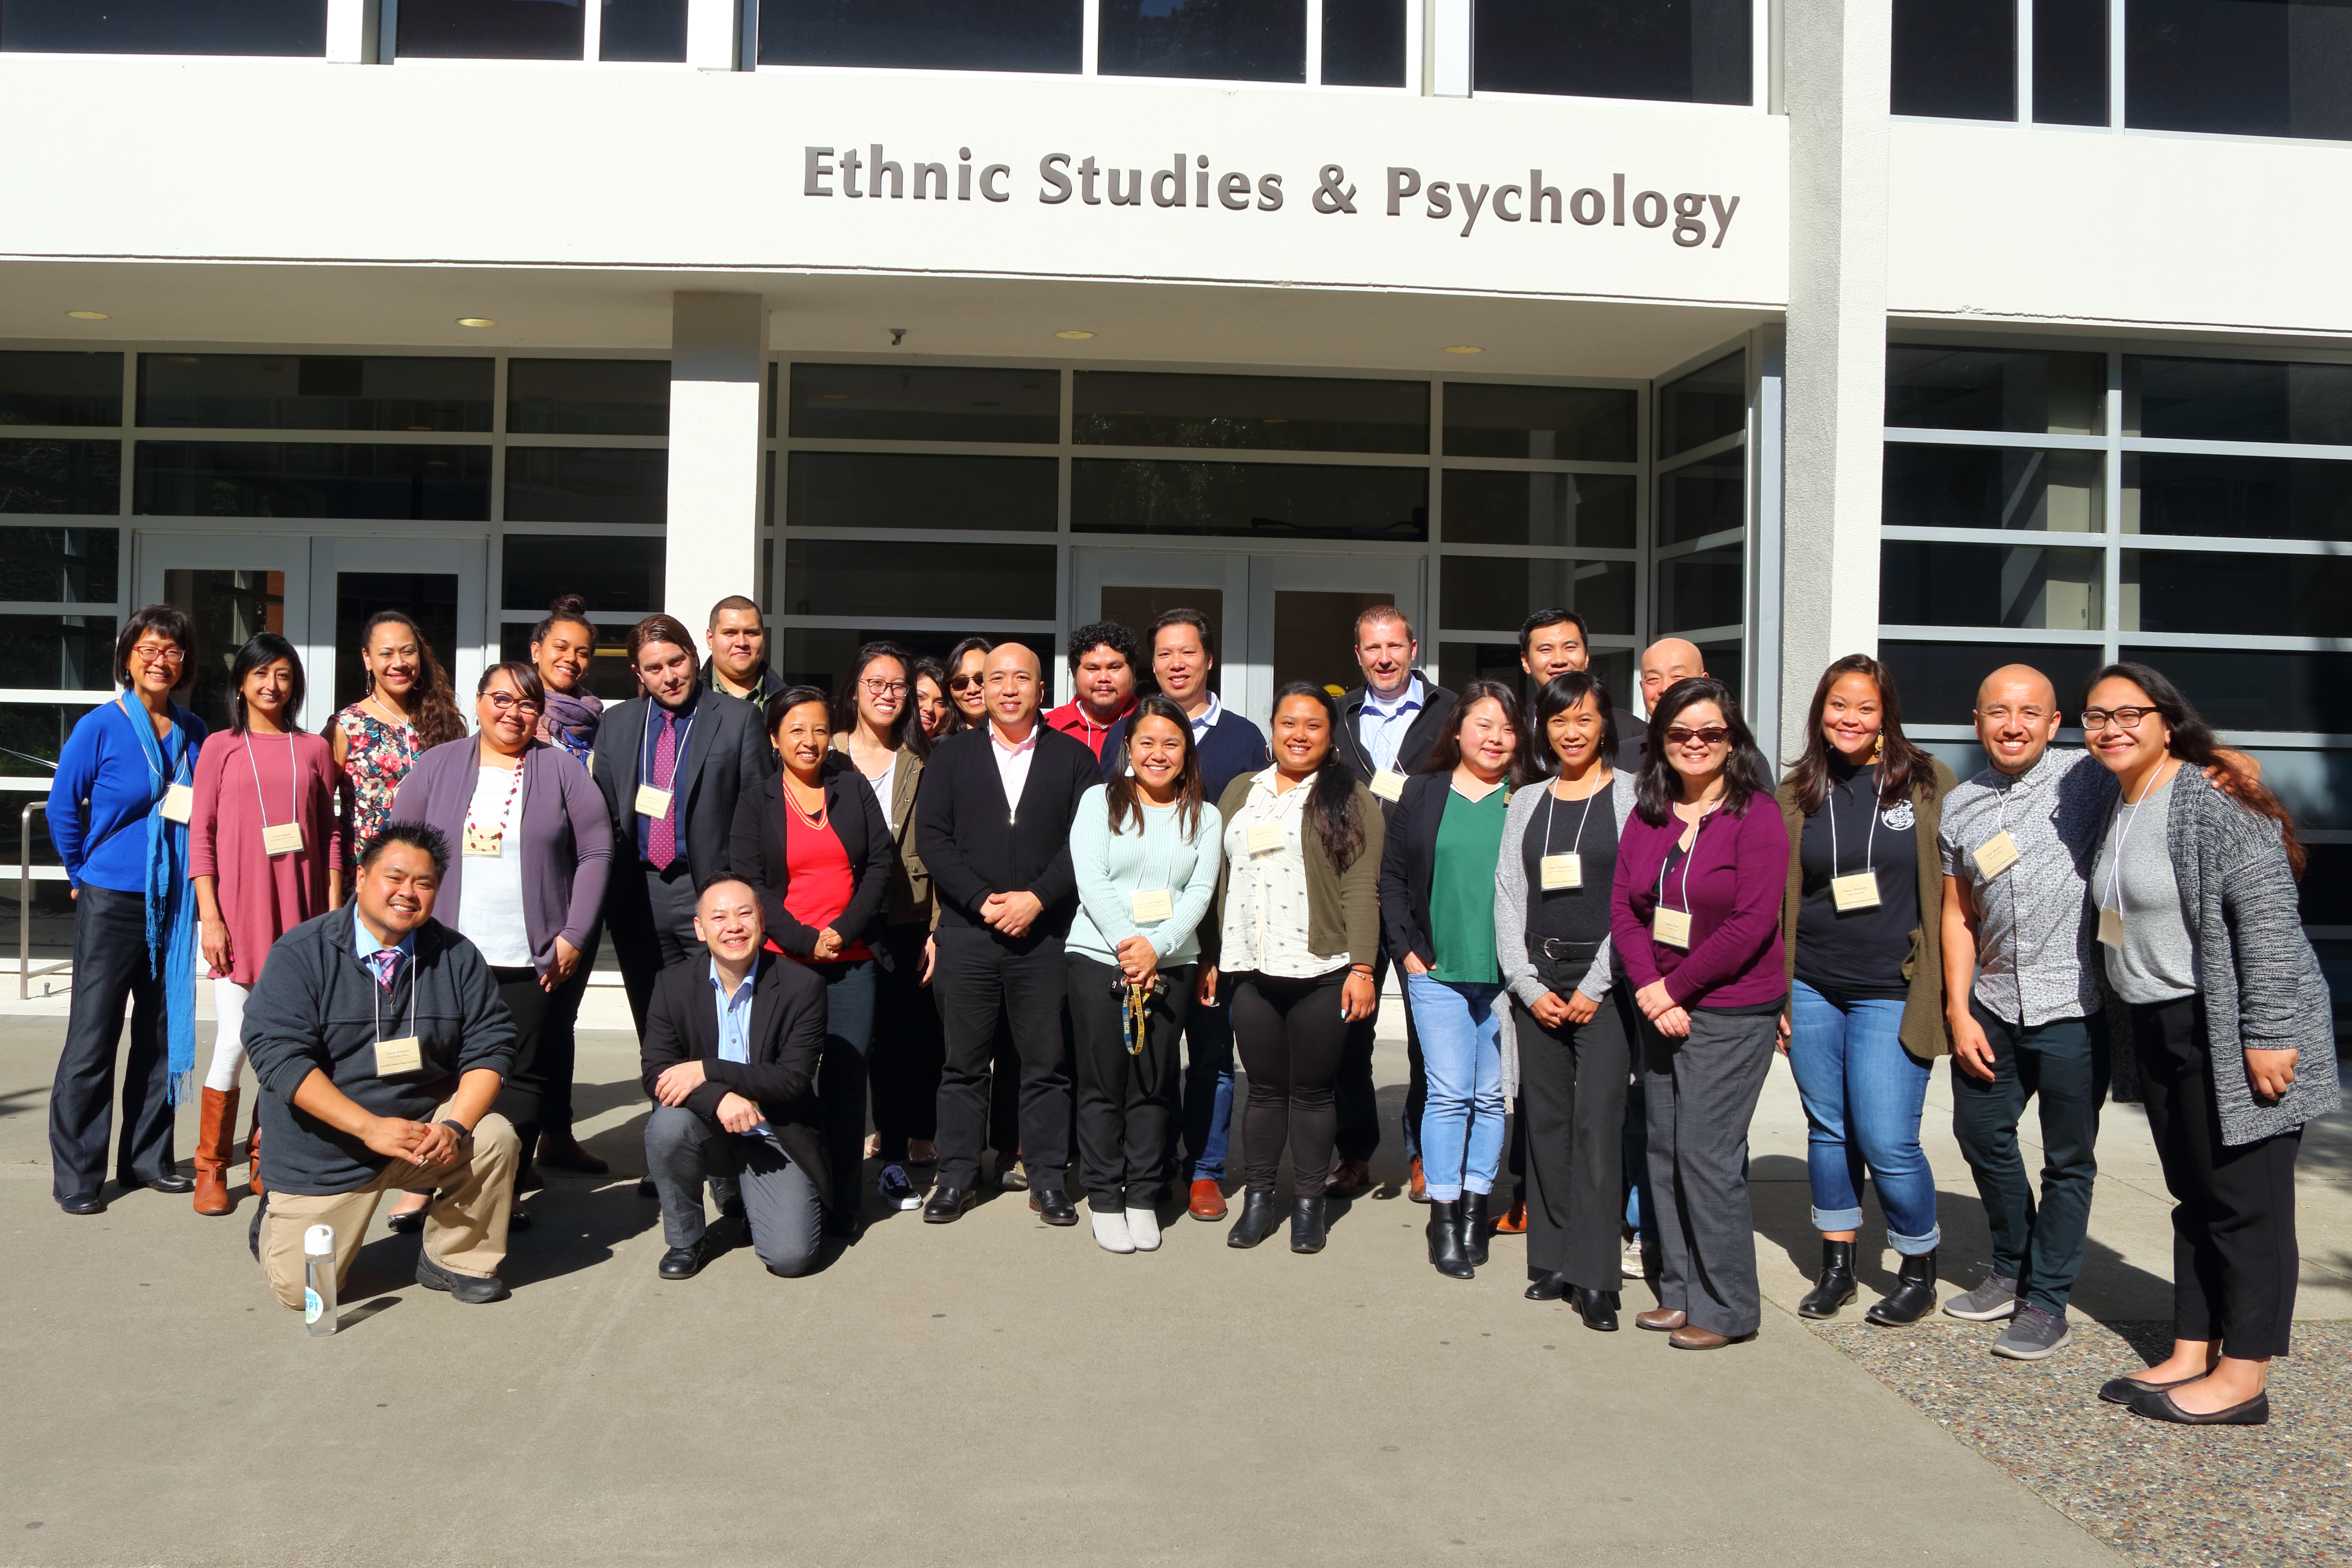 AAPI group of members in front of the Ethnic Studies & Psychology building